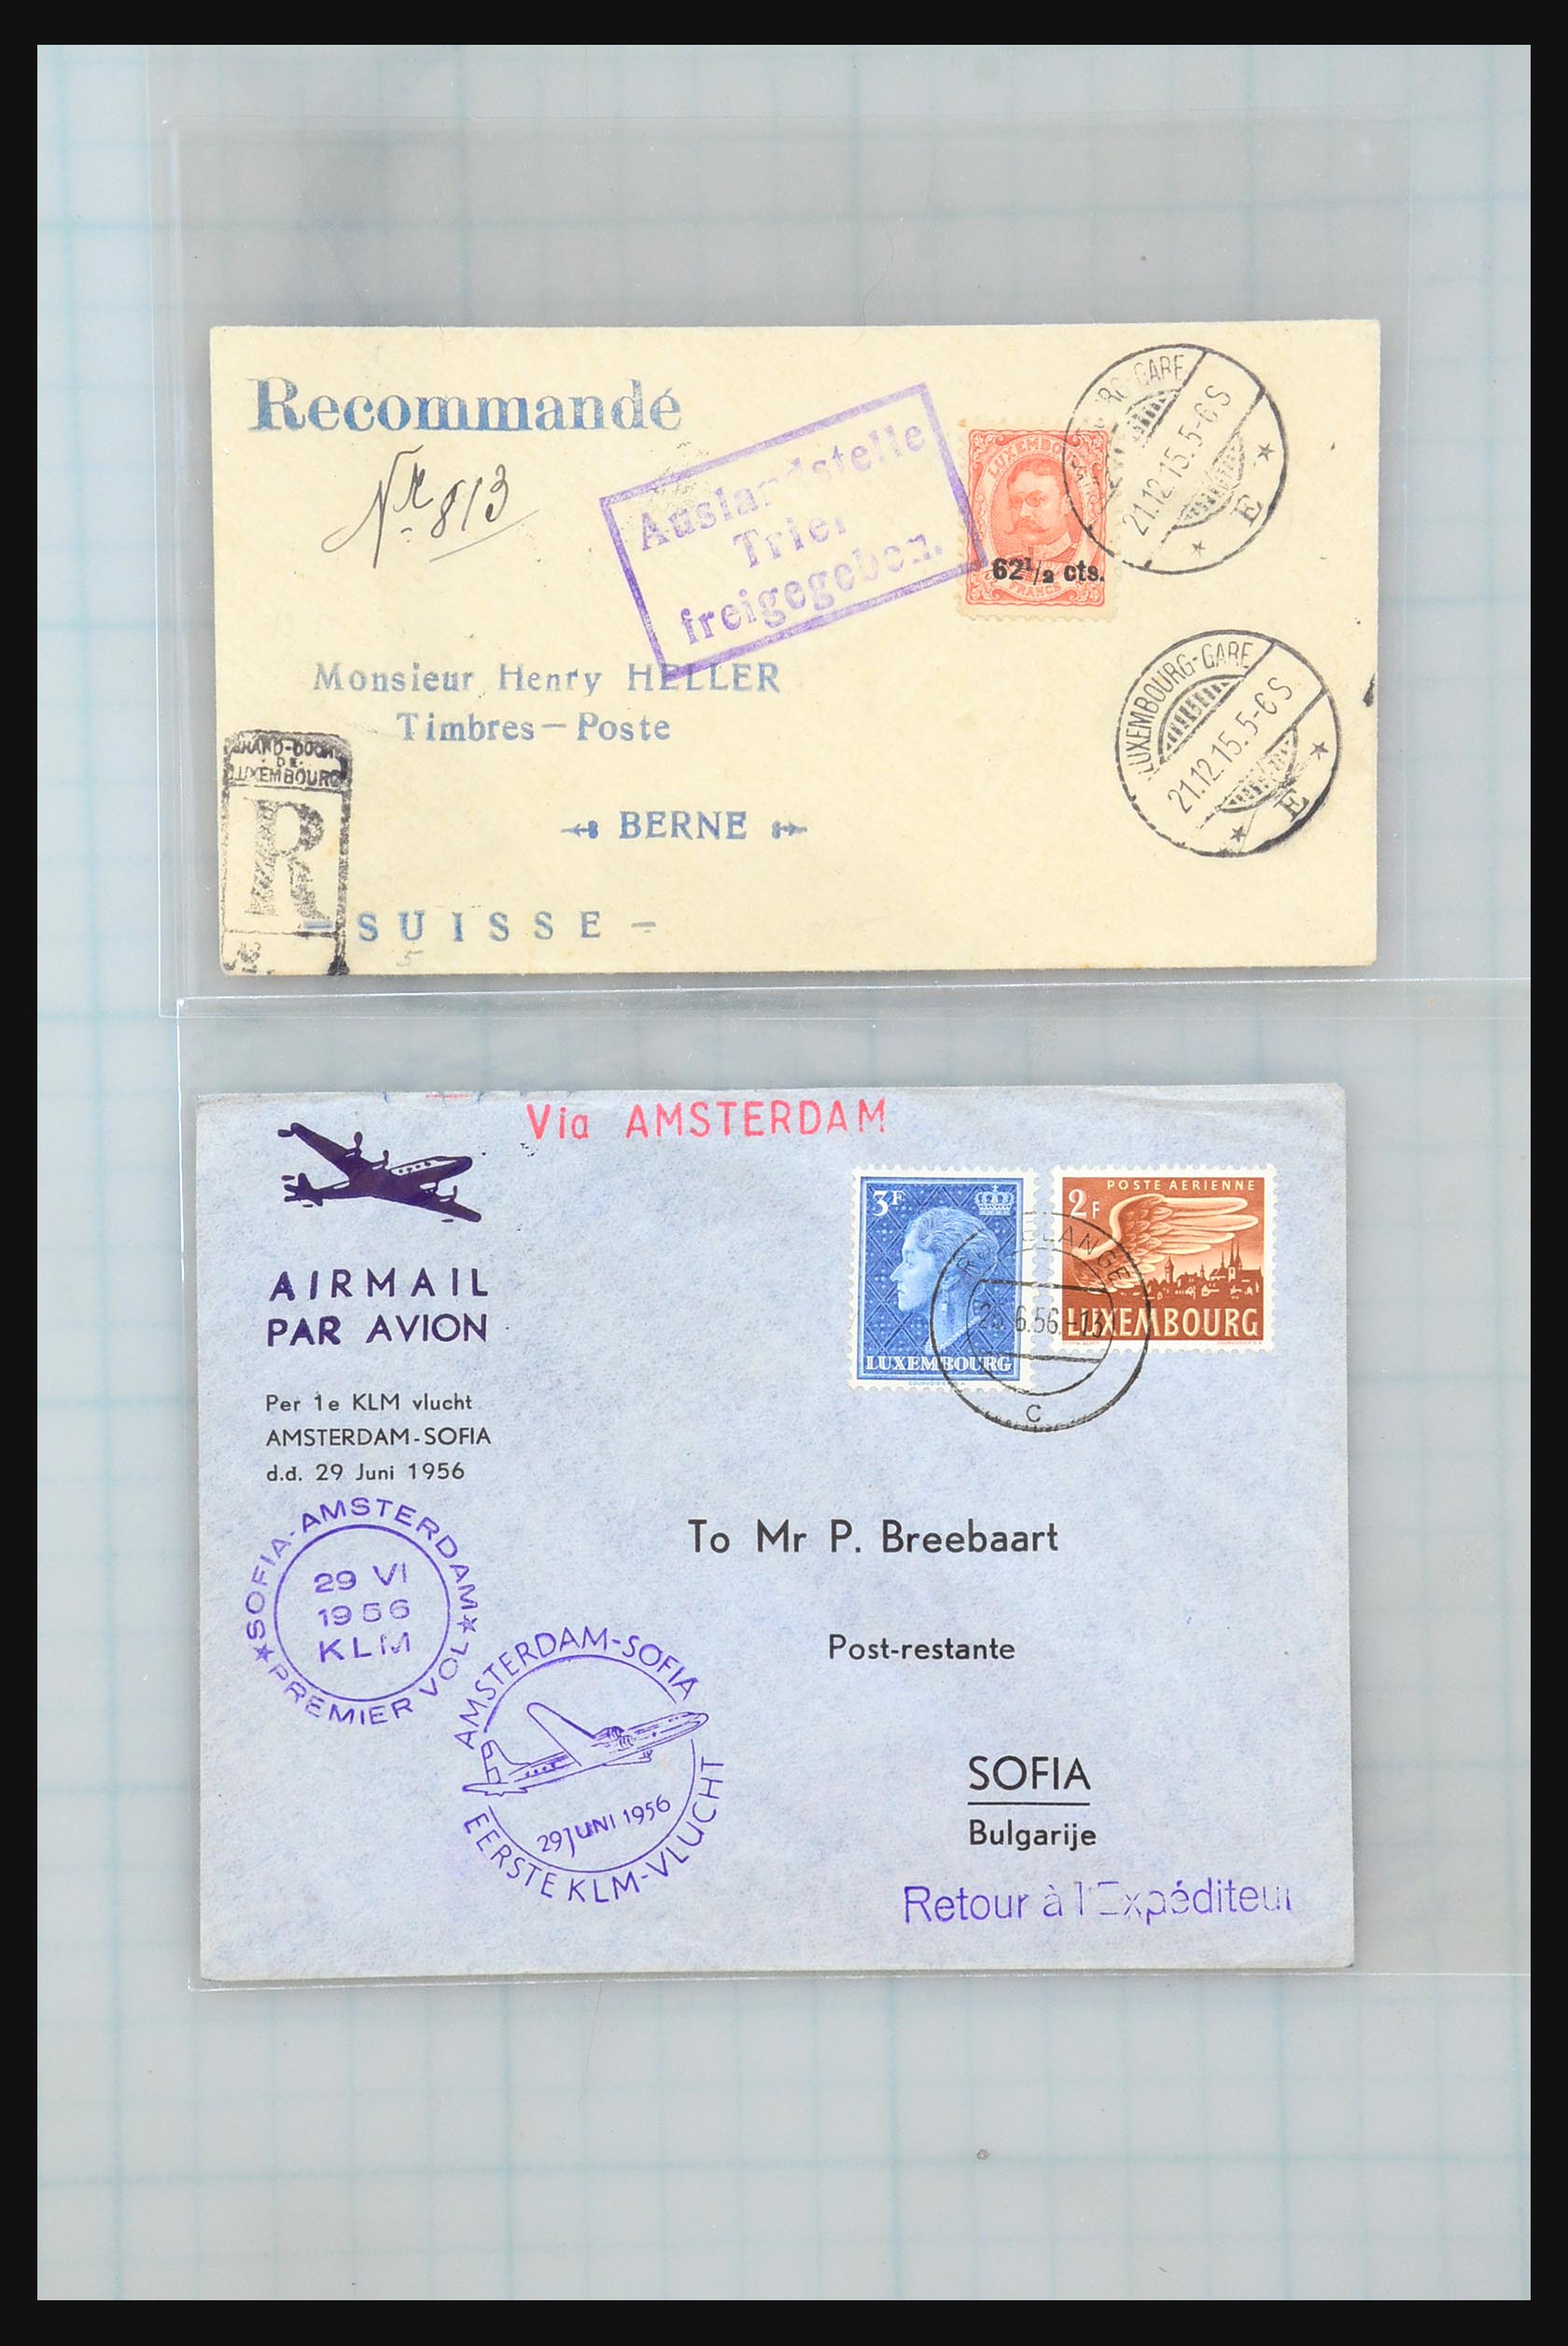 31358 074 - 31358 Portugal/Luxemburg/Greece covers 1880-1960.